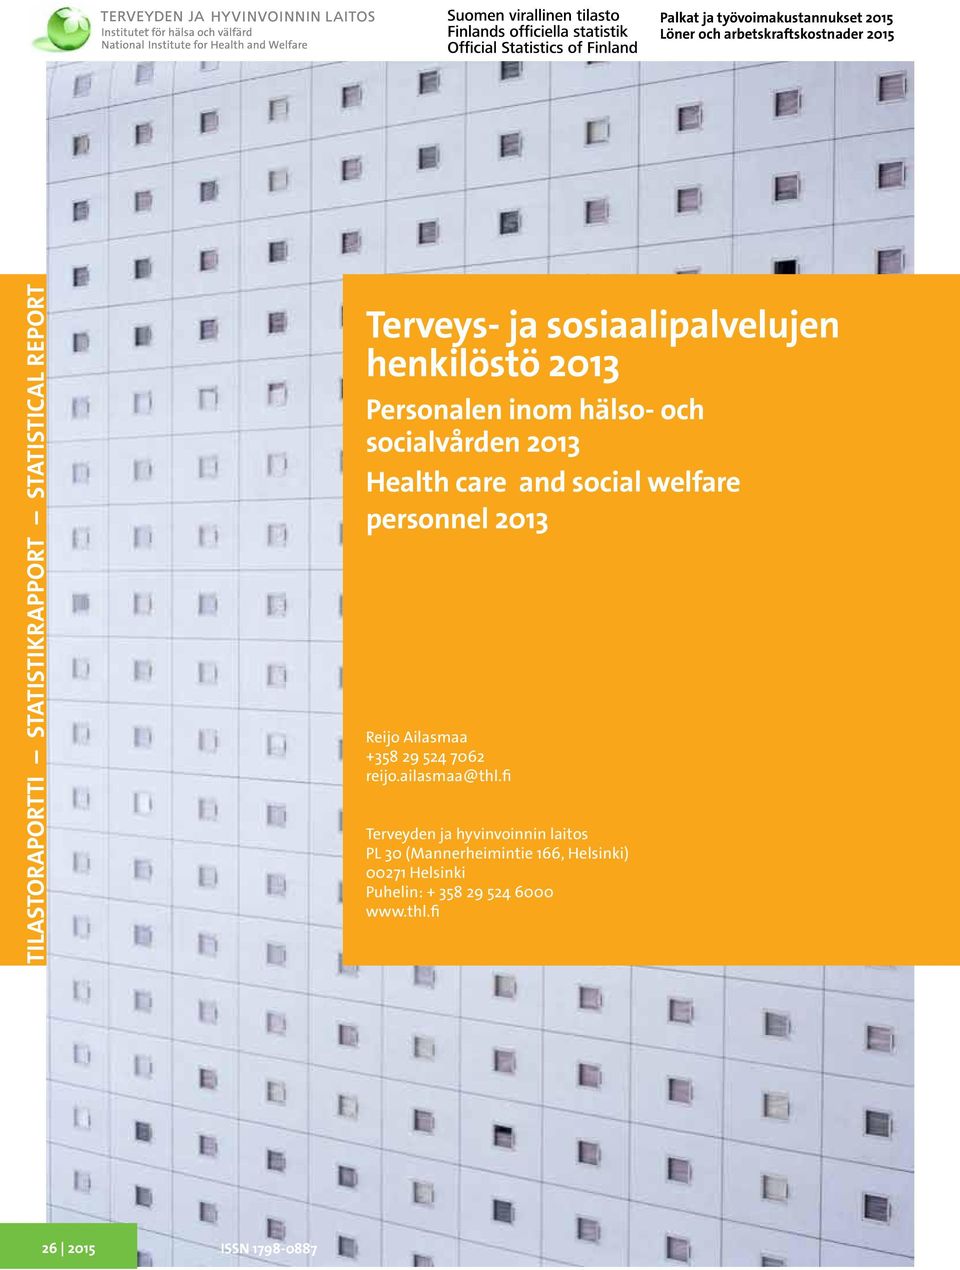 Health care and social welfare personnel 2013 Reijo Ailasmaa +358 29 524 7062 reijo.ailasmaa@thl.